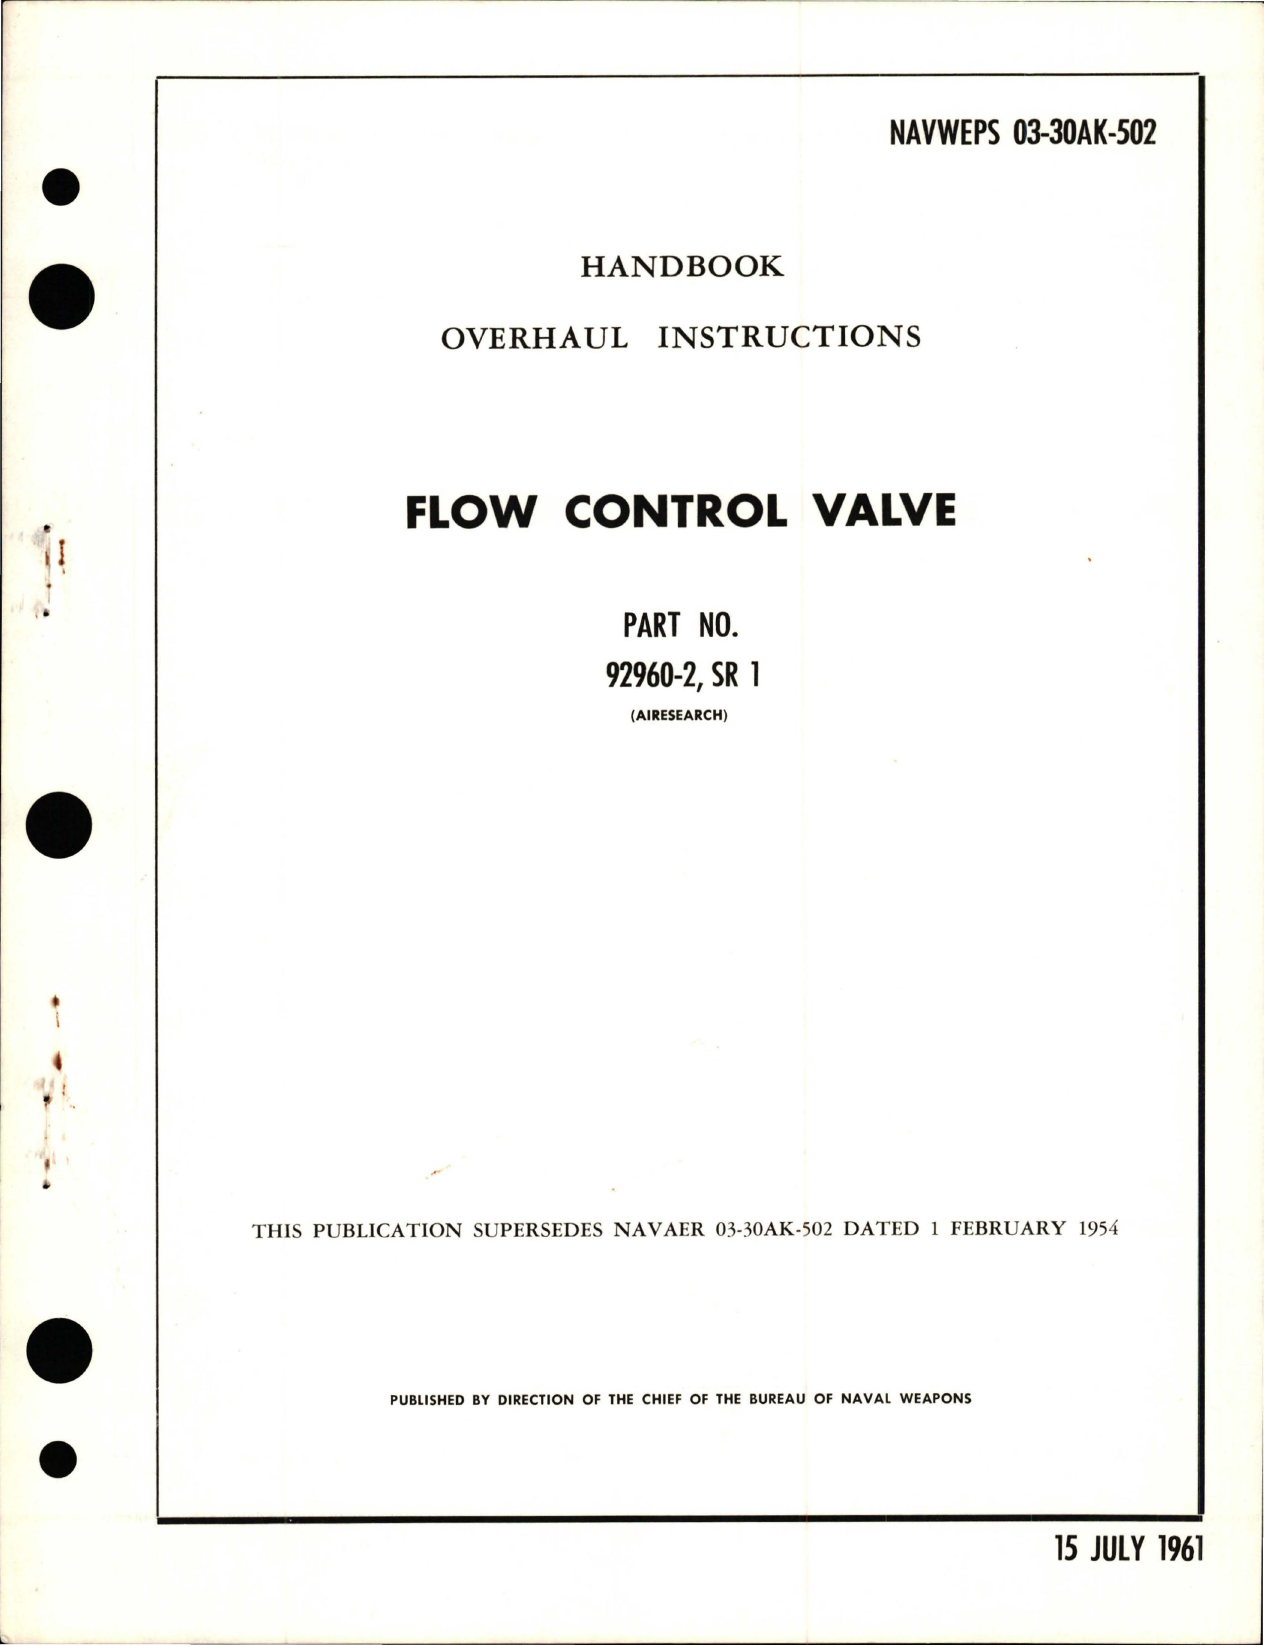 Sample page 1 from AirCorps Library document: Overhaul Instructions for Flow Control Valve - Part 92960-2 SR 1